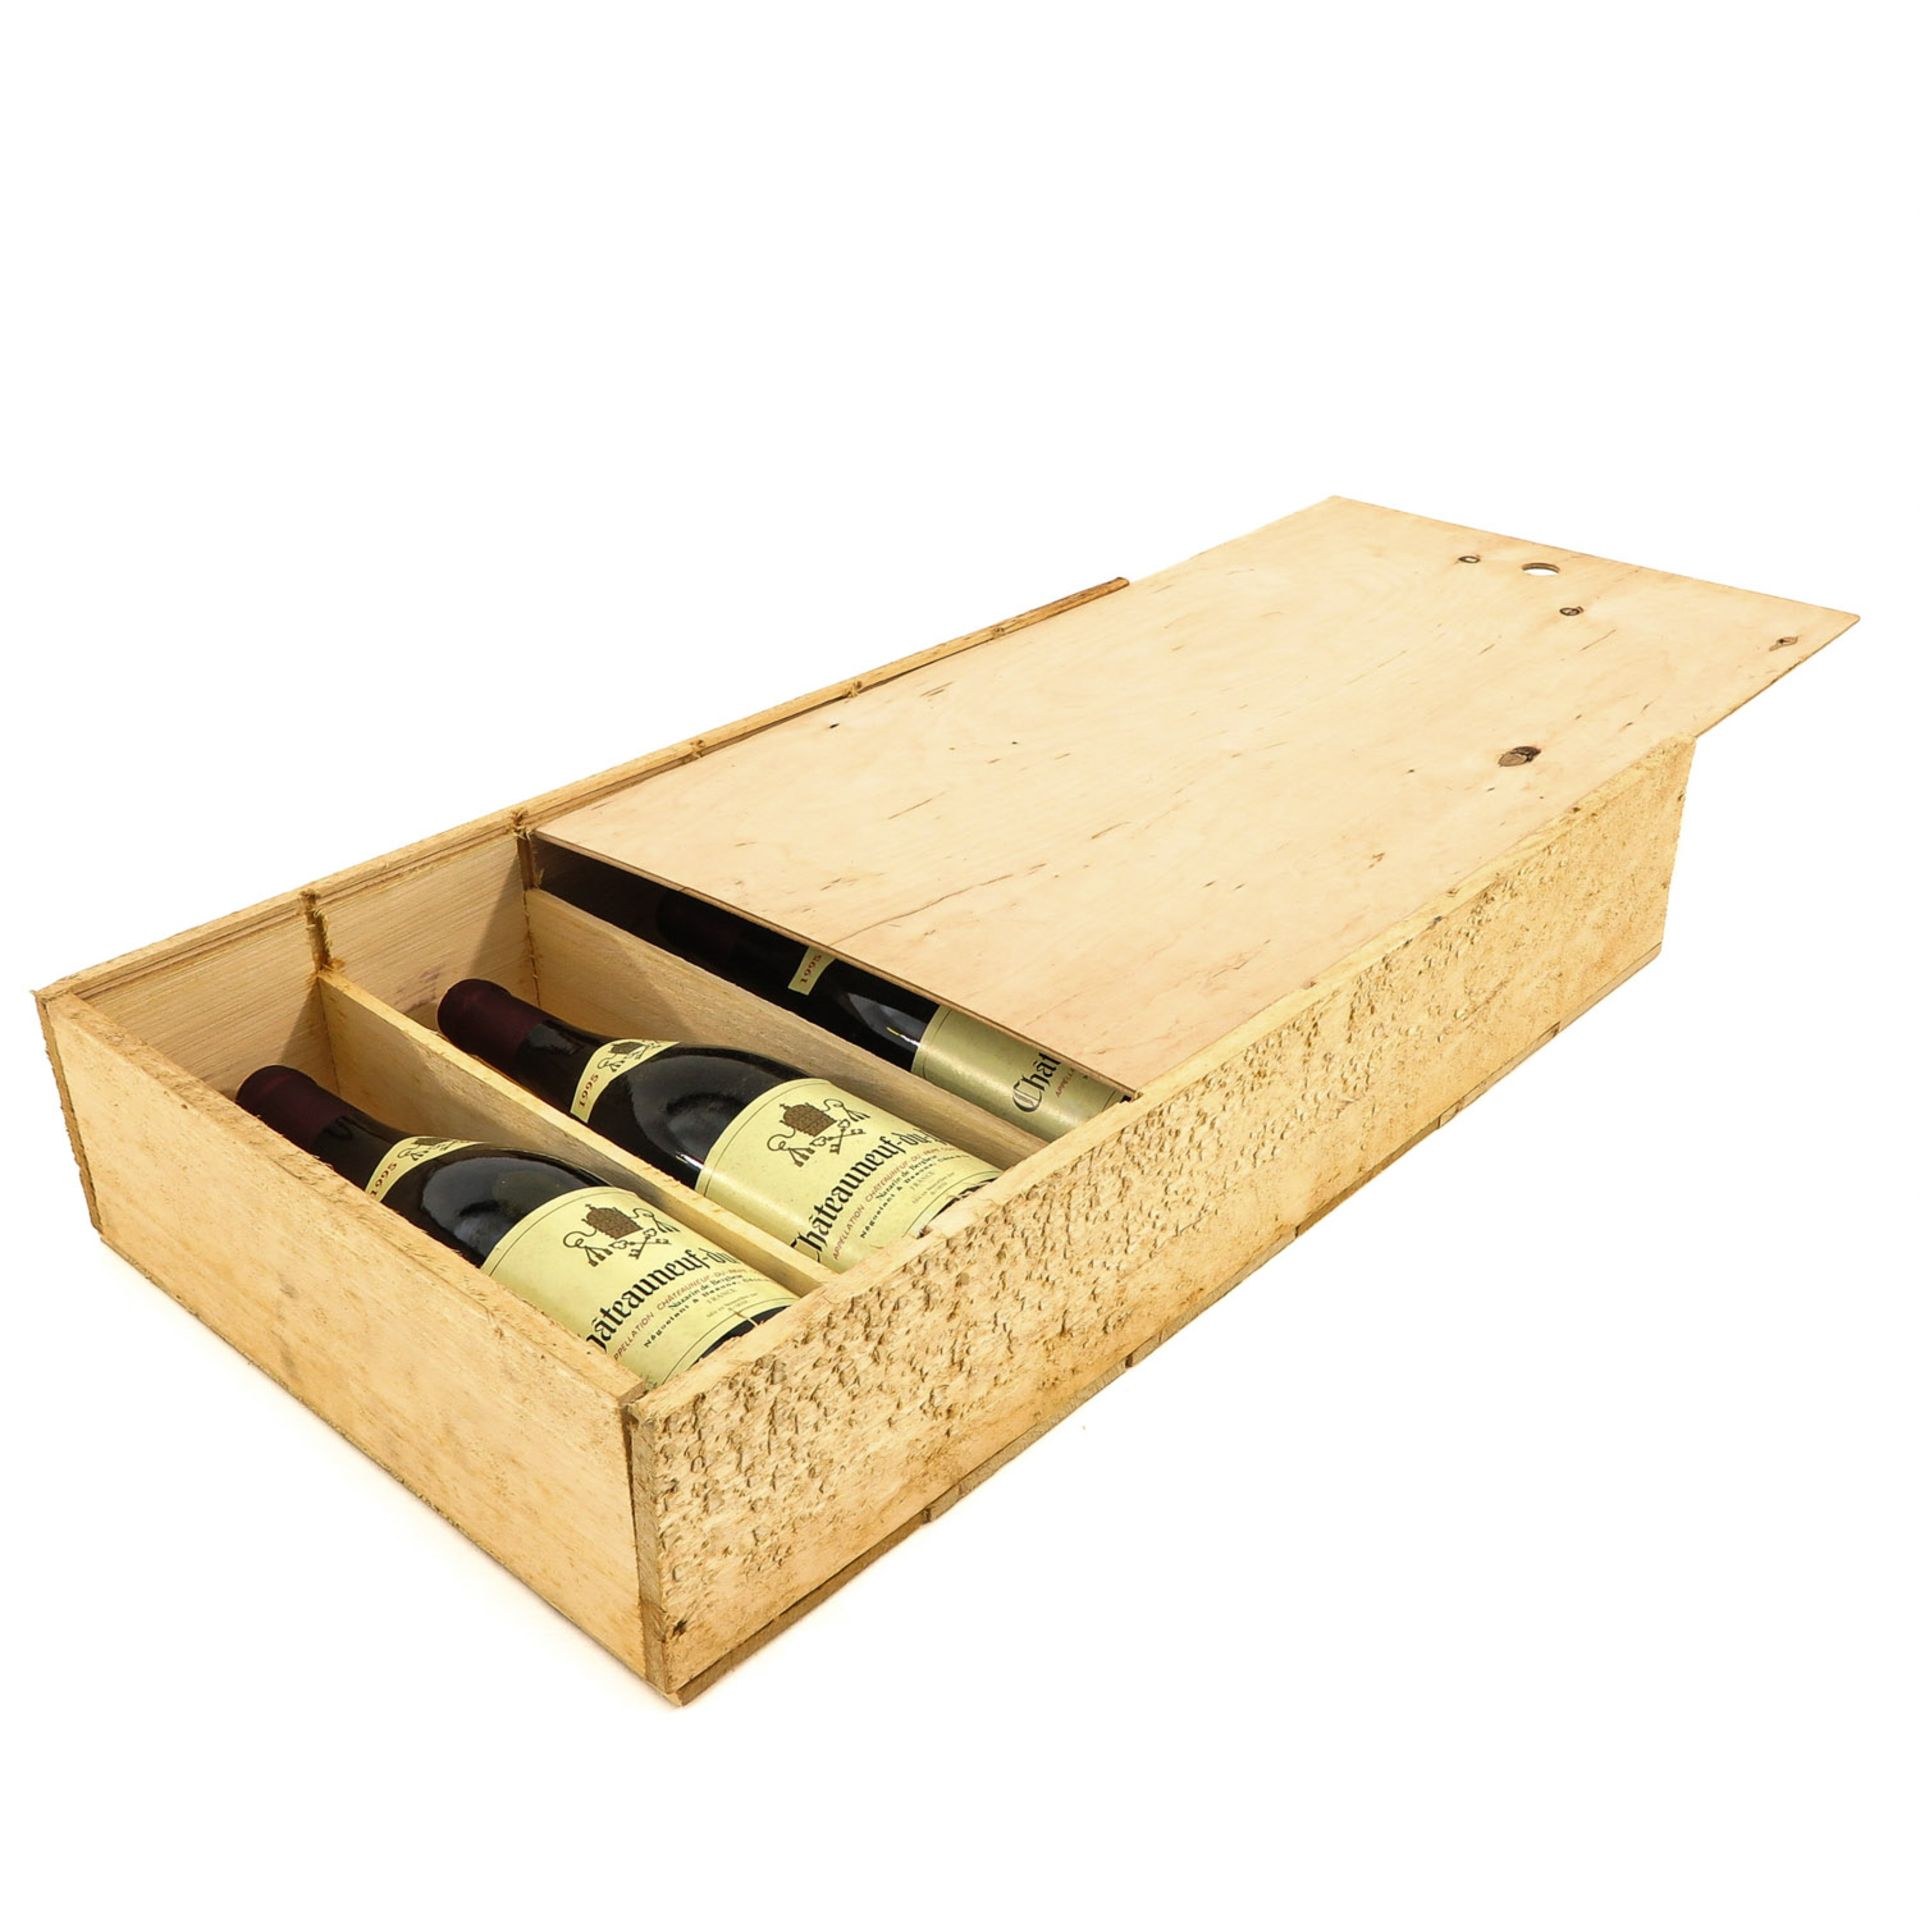 A Crate with 6 Bottles of Chateauneuf-du-Pape 1995 - Image 10 of 10